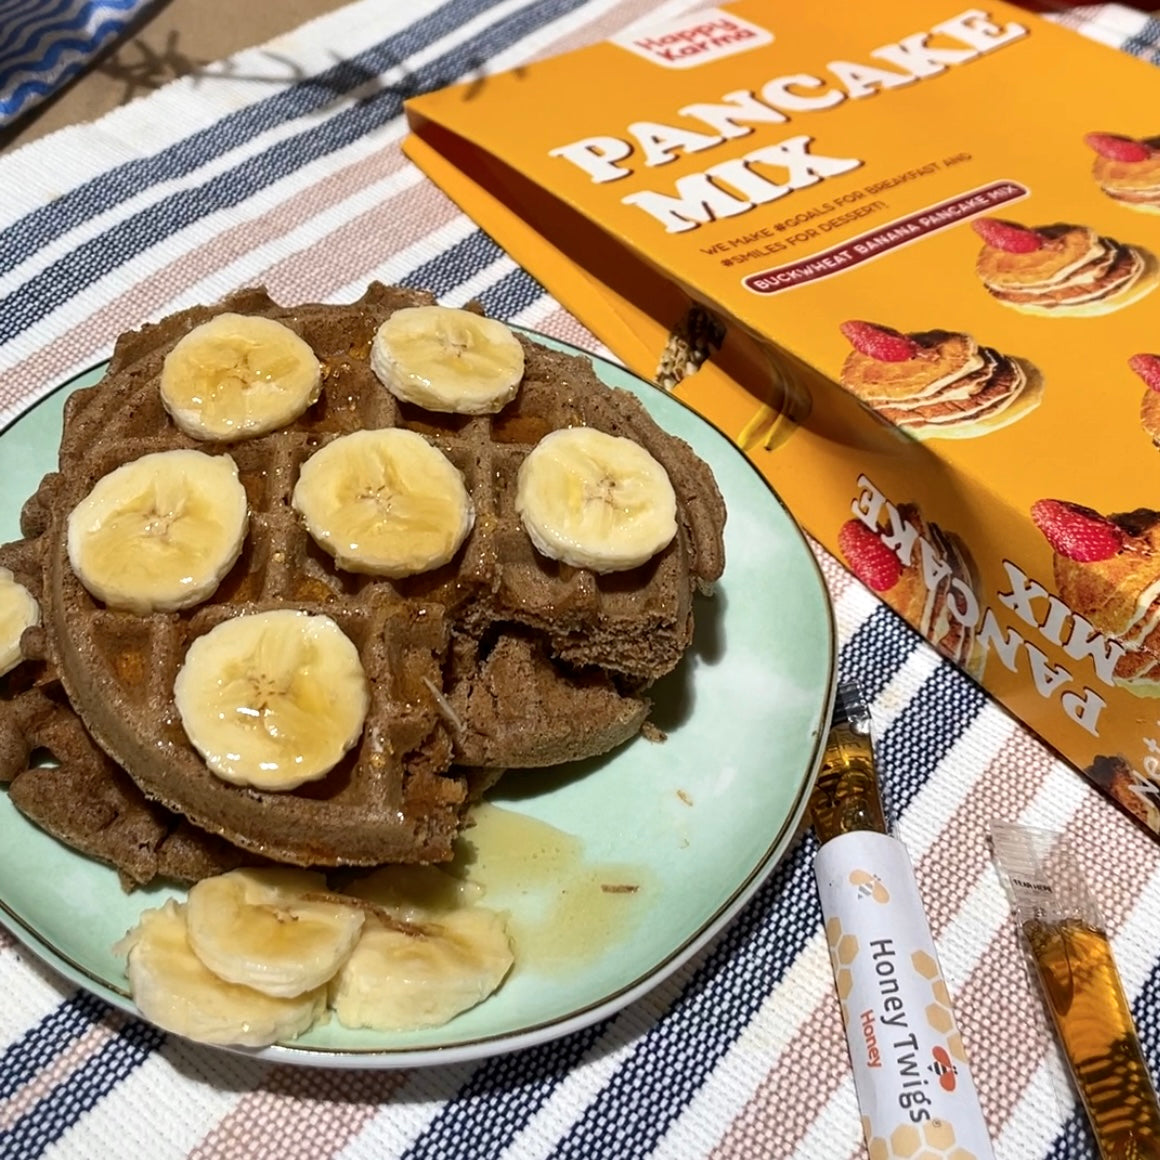 Make Delicious and Nutritious Waffles with Happy Karma Buckwheat Pancake Mix